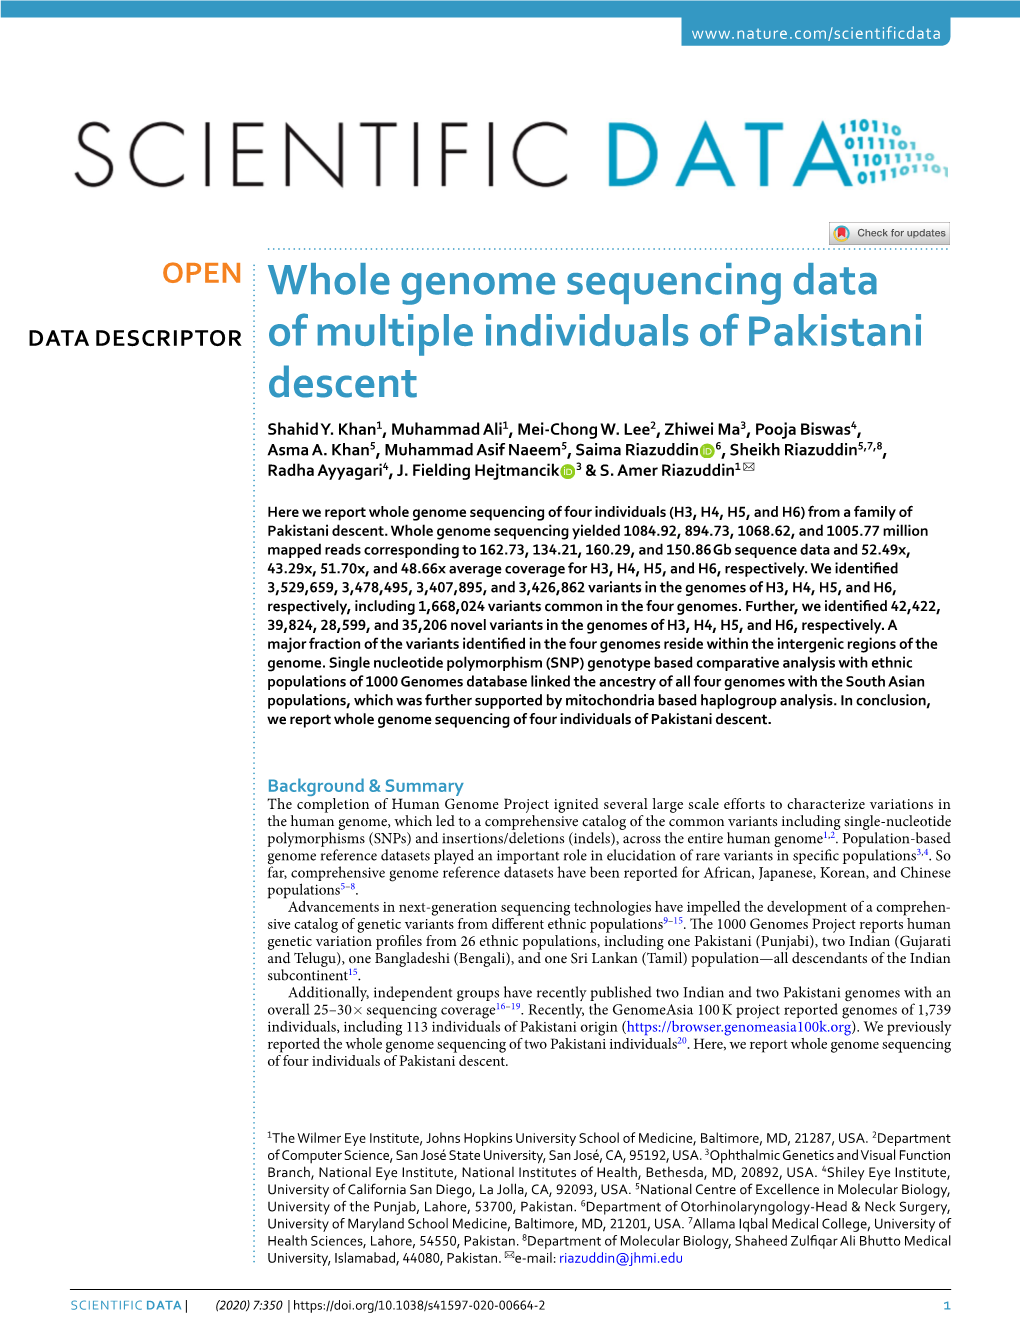 Whole Genome Sequencing Data of Multiple Individuals of Pakistani